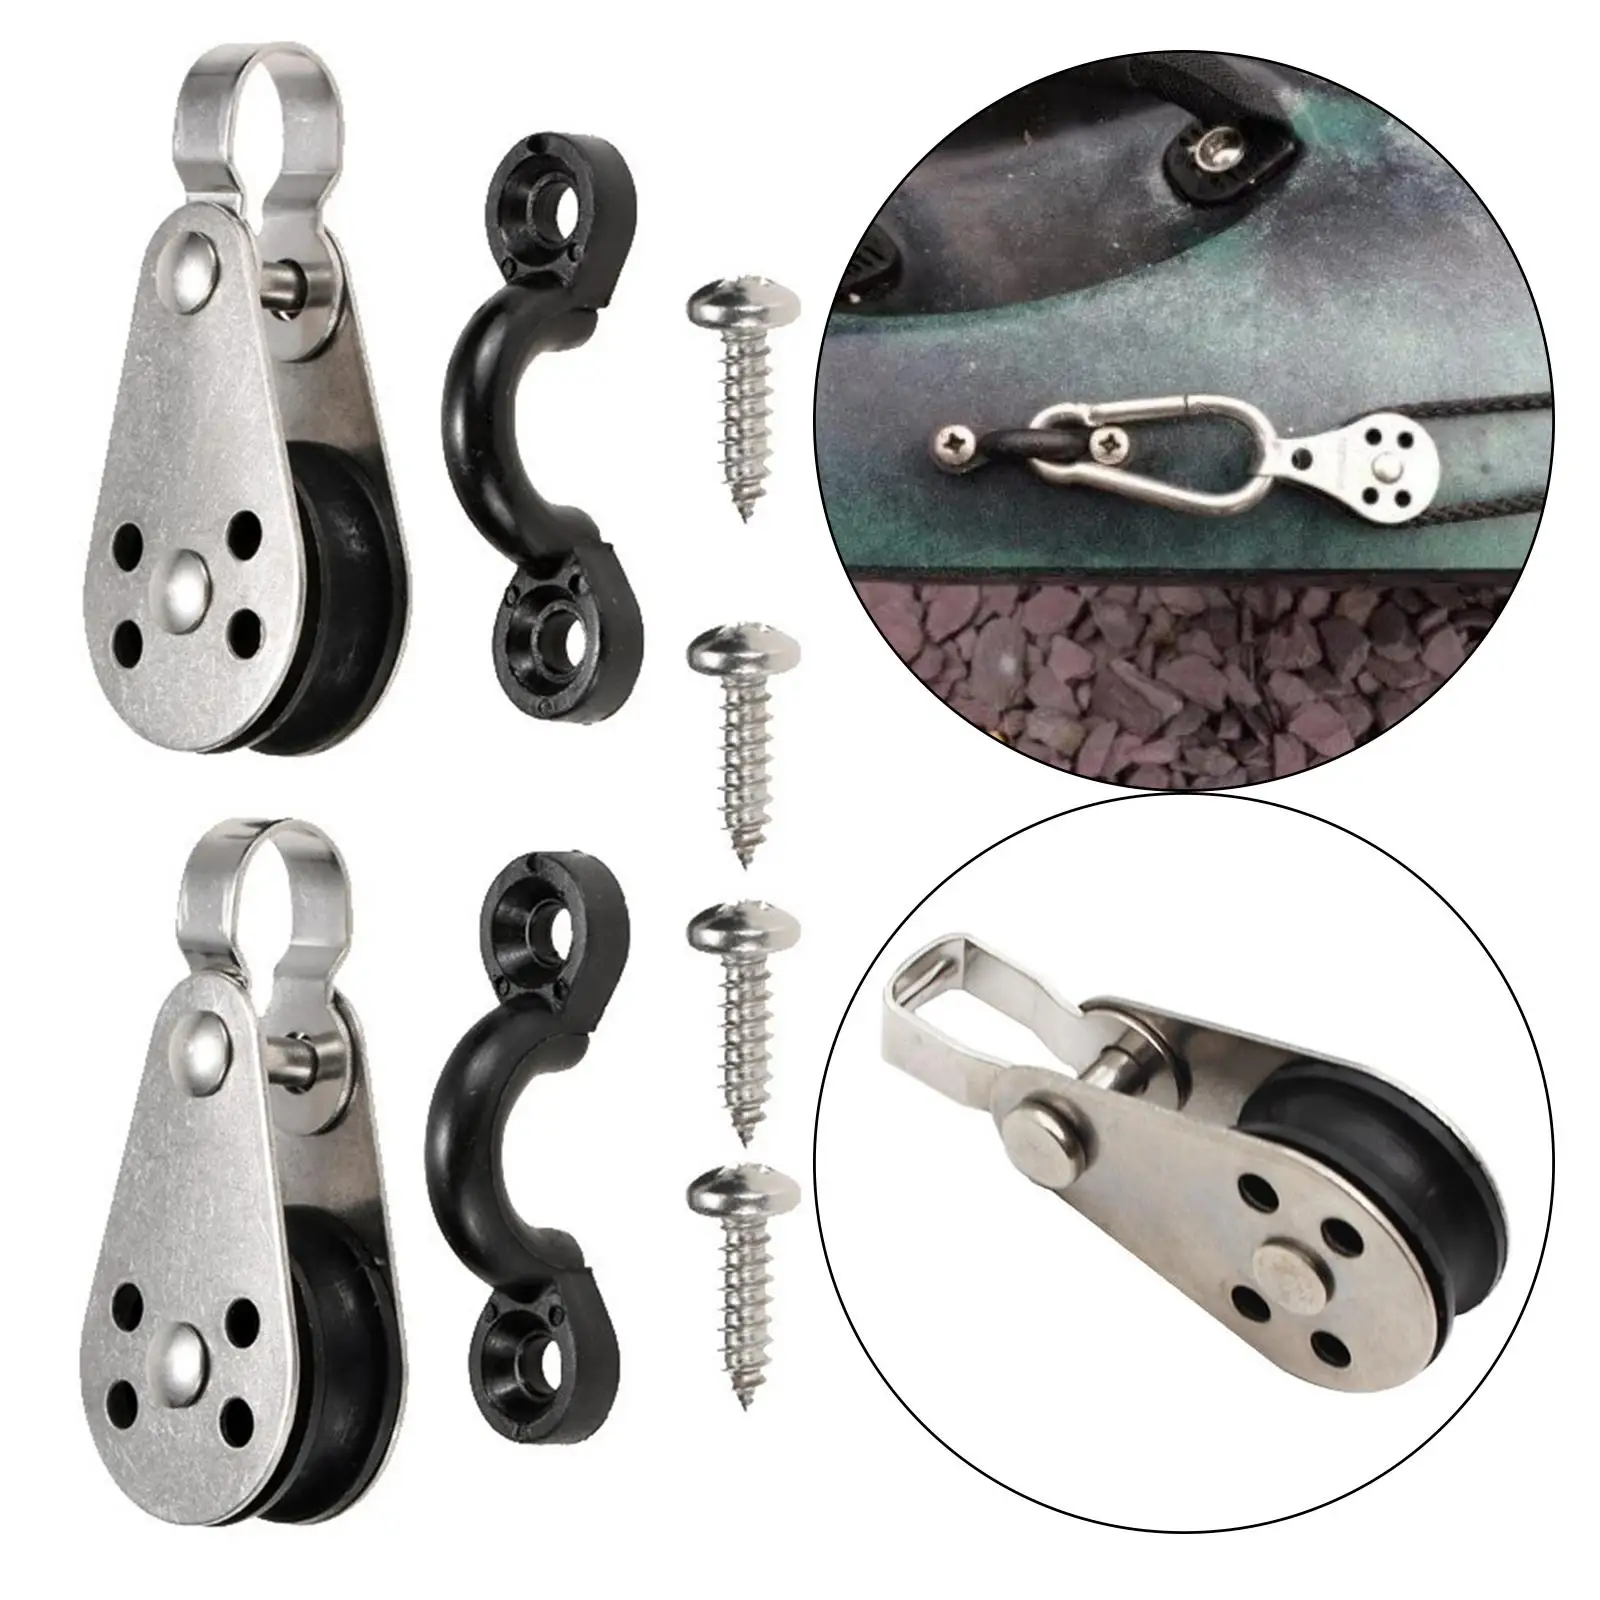 Kayak Anchor Trolley Kit 2 Pulley Blocks Screws Rivets Accessory for Rigging Tie